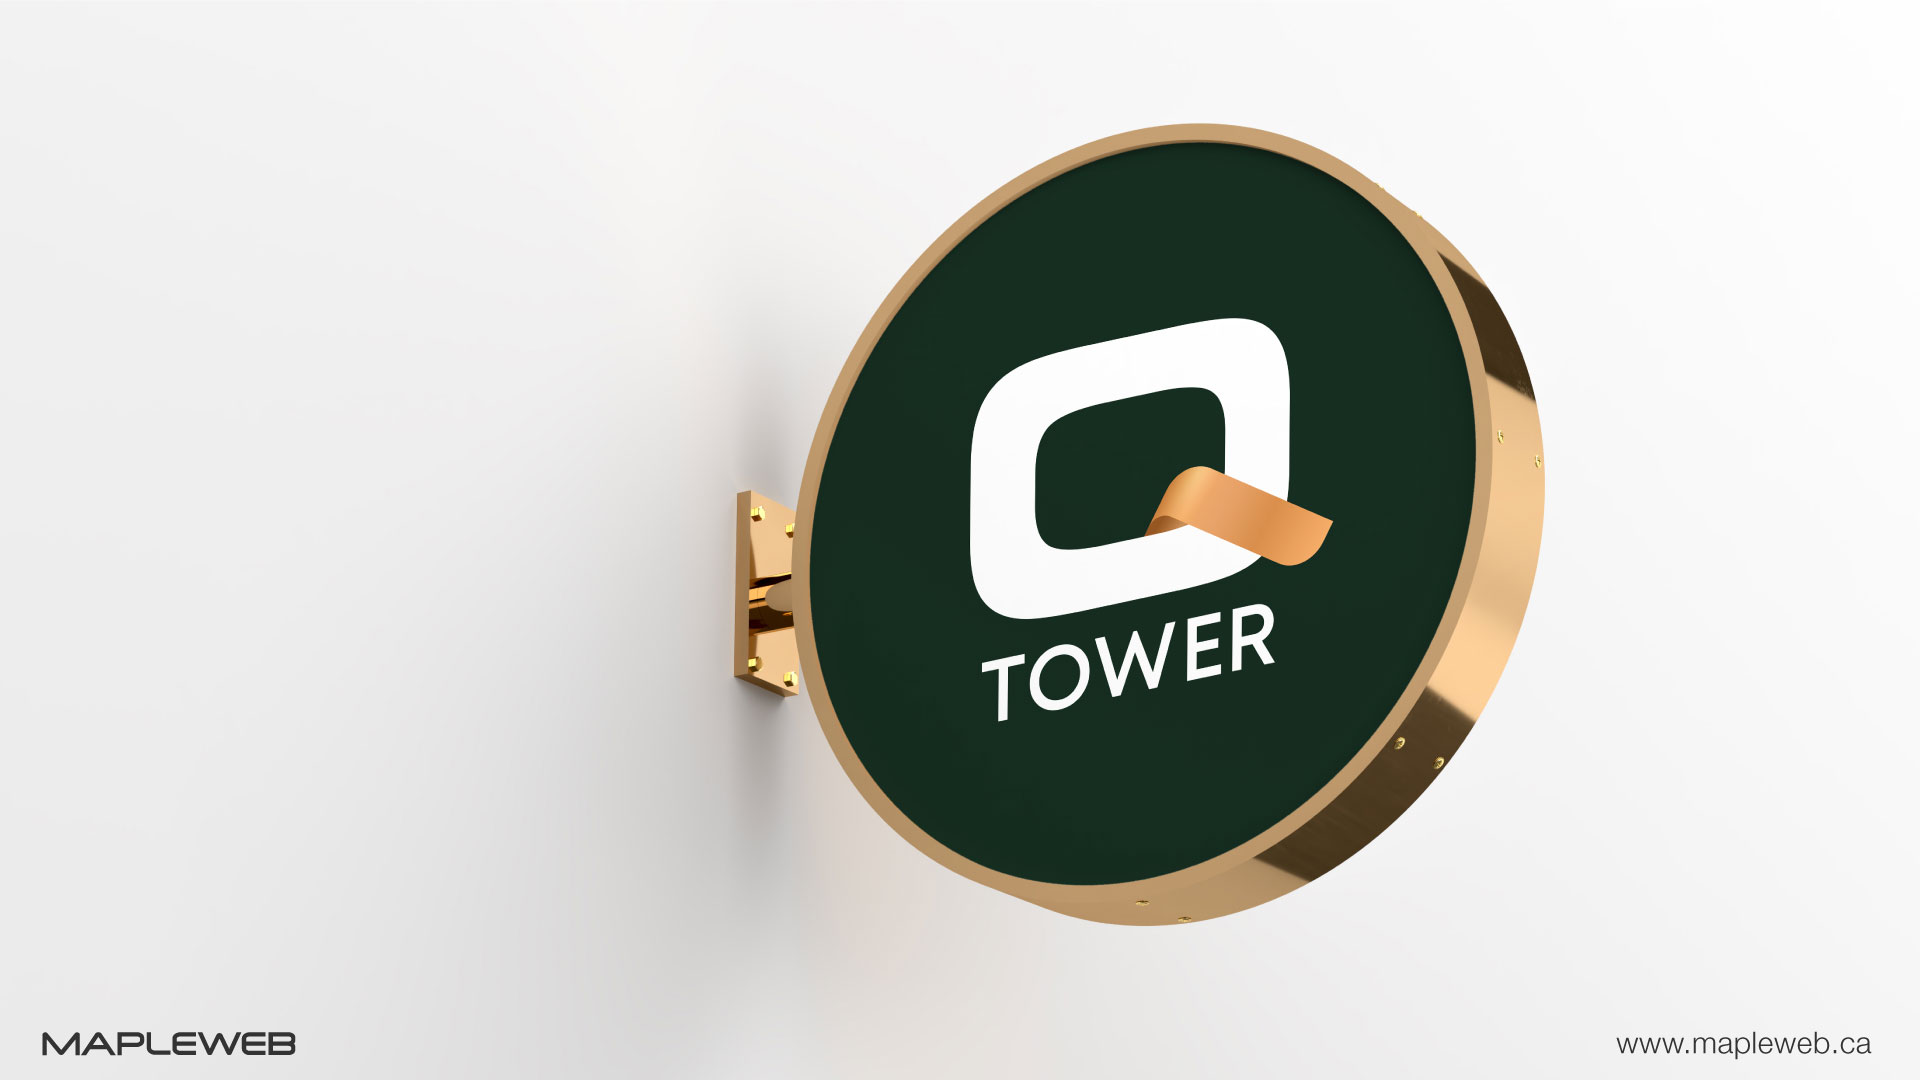 q-tower-brand-logo-design-by-mapleweb-vancouver-canada-outside-signage-mock